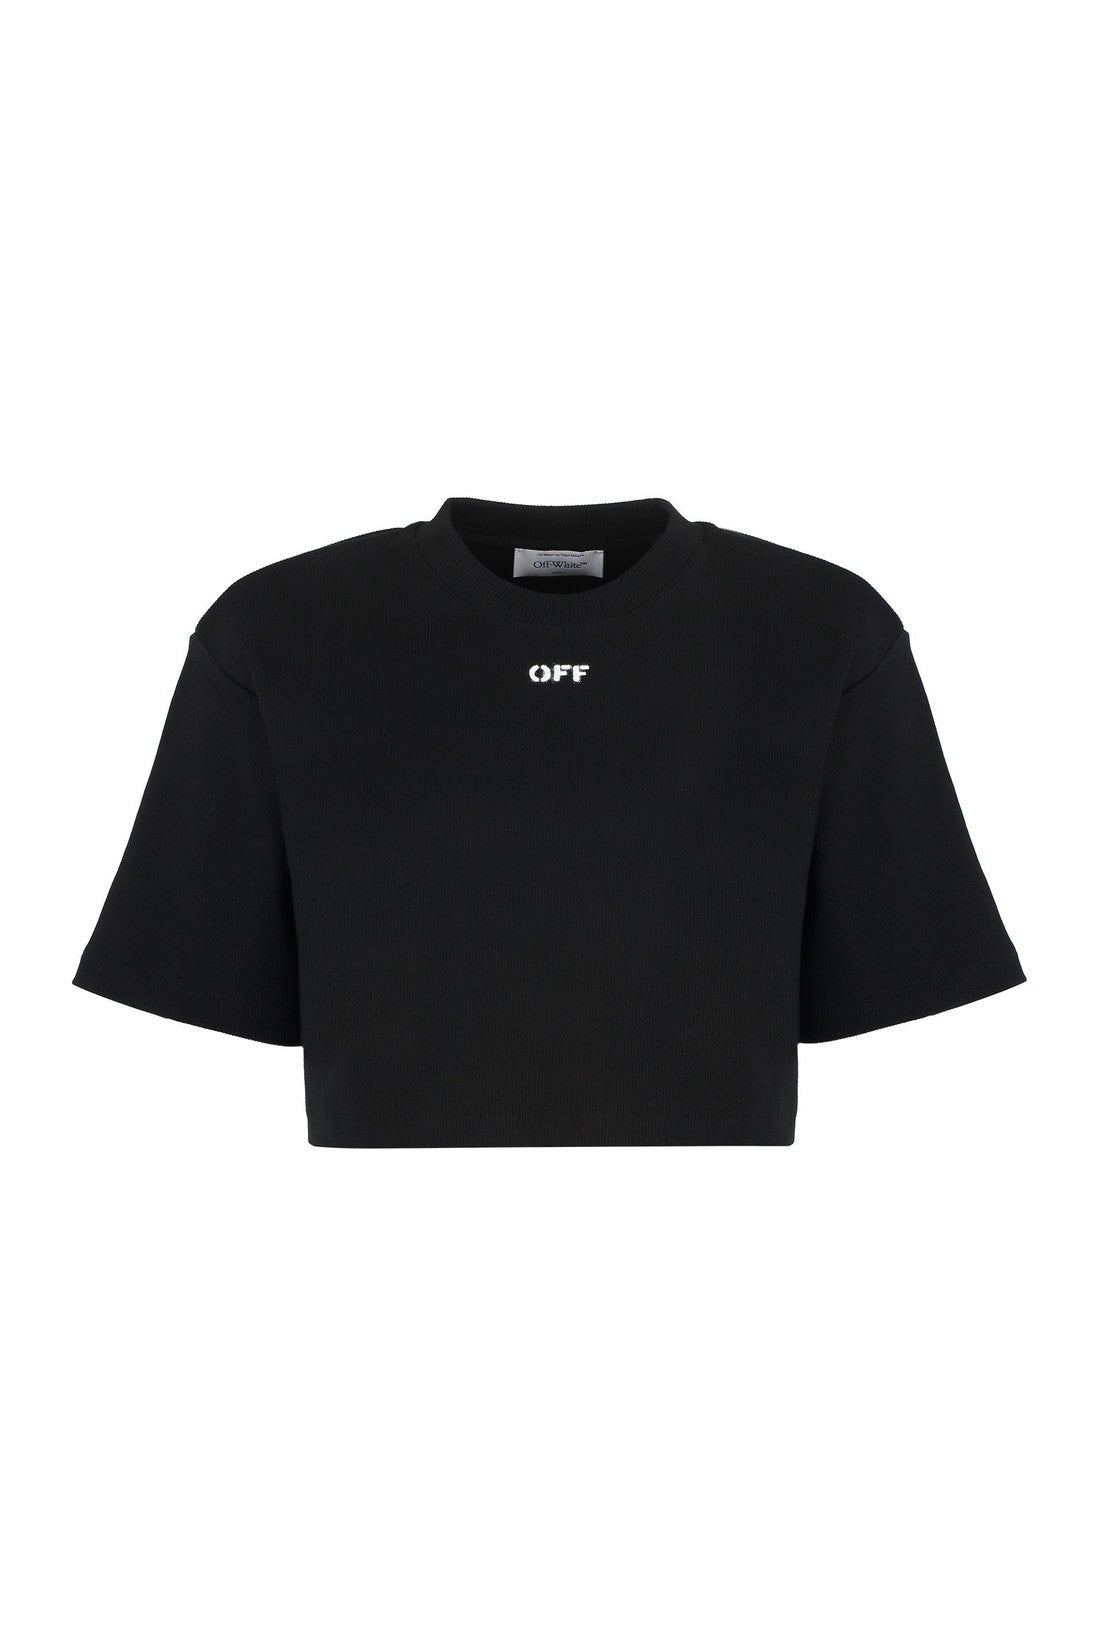 Off-White-OUTLET-SALE-Logo detail cropped t-shirt-ARCHIVIST